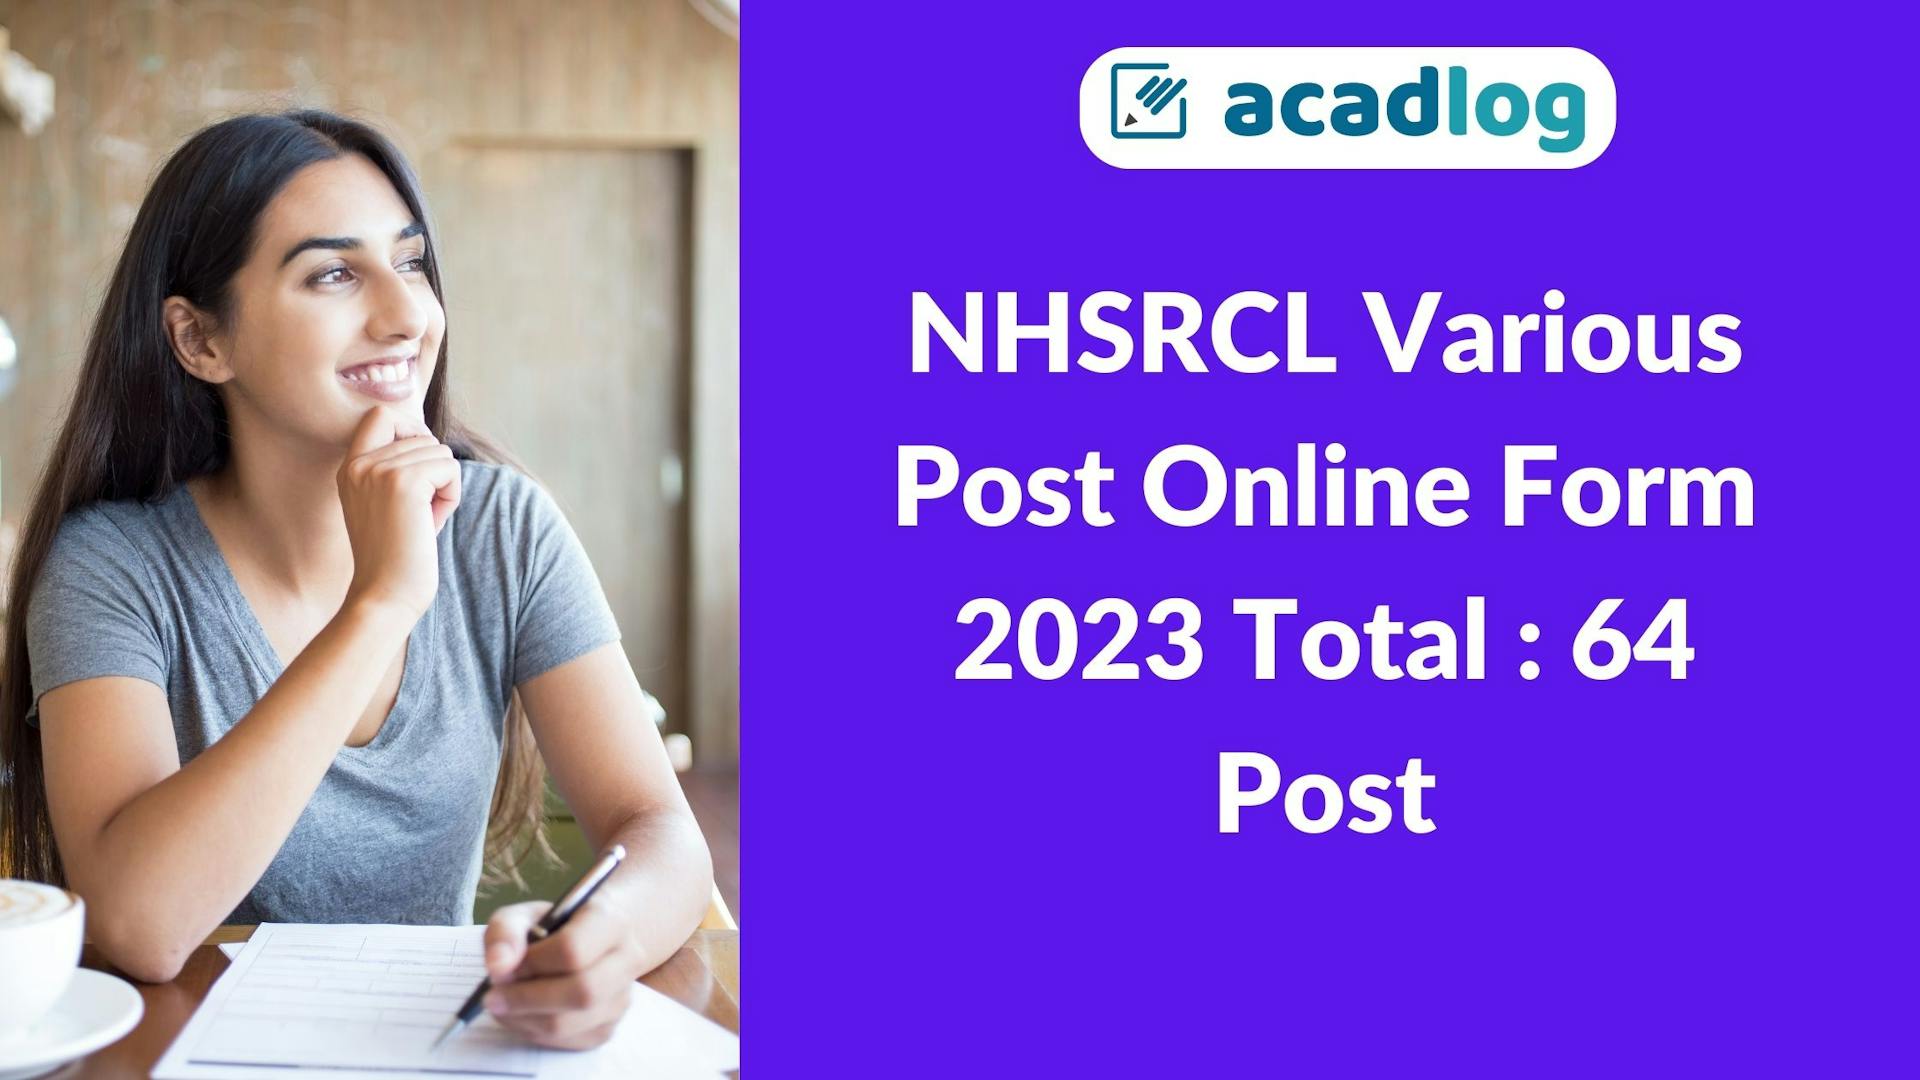 Acadlog: UNational High Speed Rail Corporation Limited NHRCL Recruitment 2023 Apply Online for 64 Post